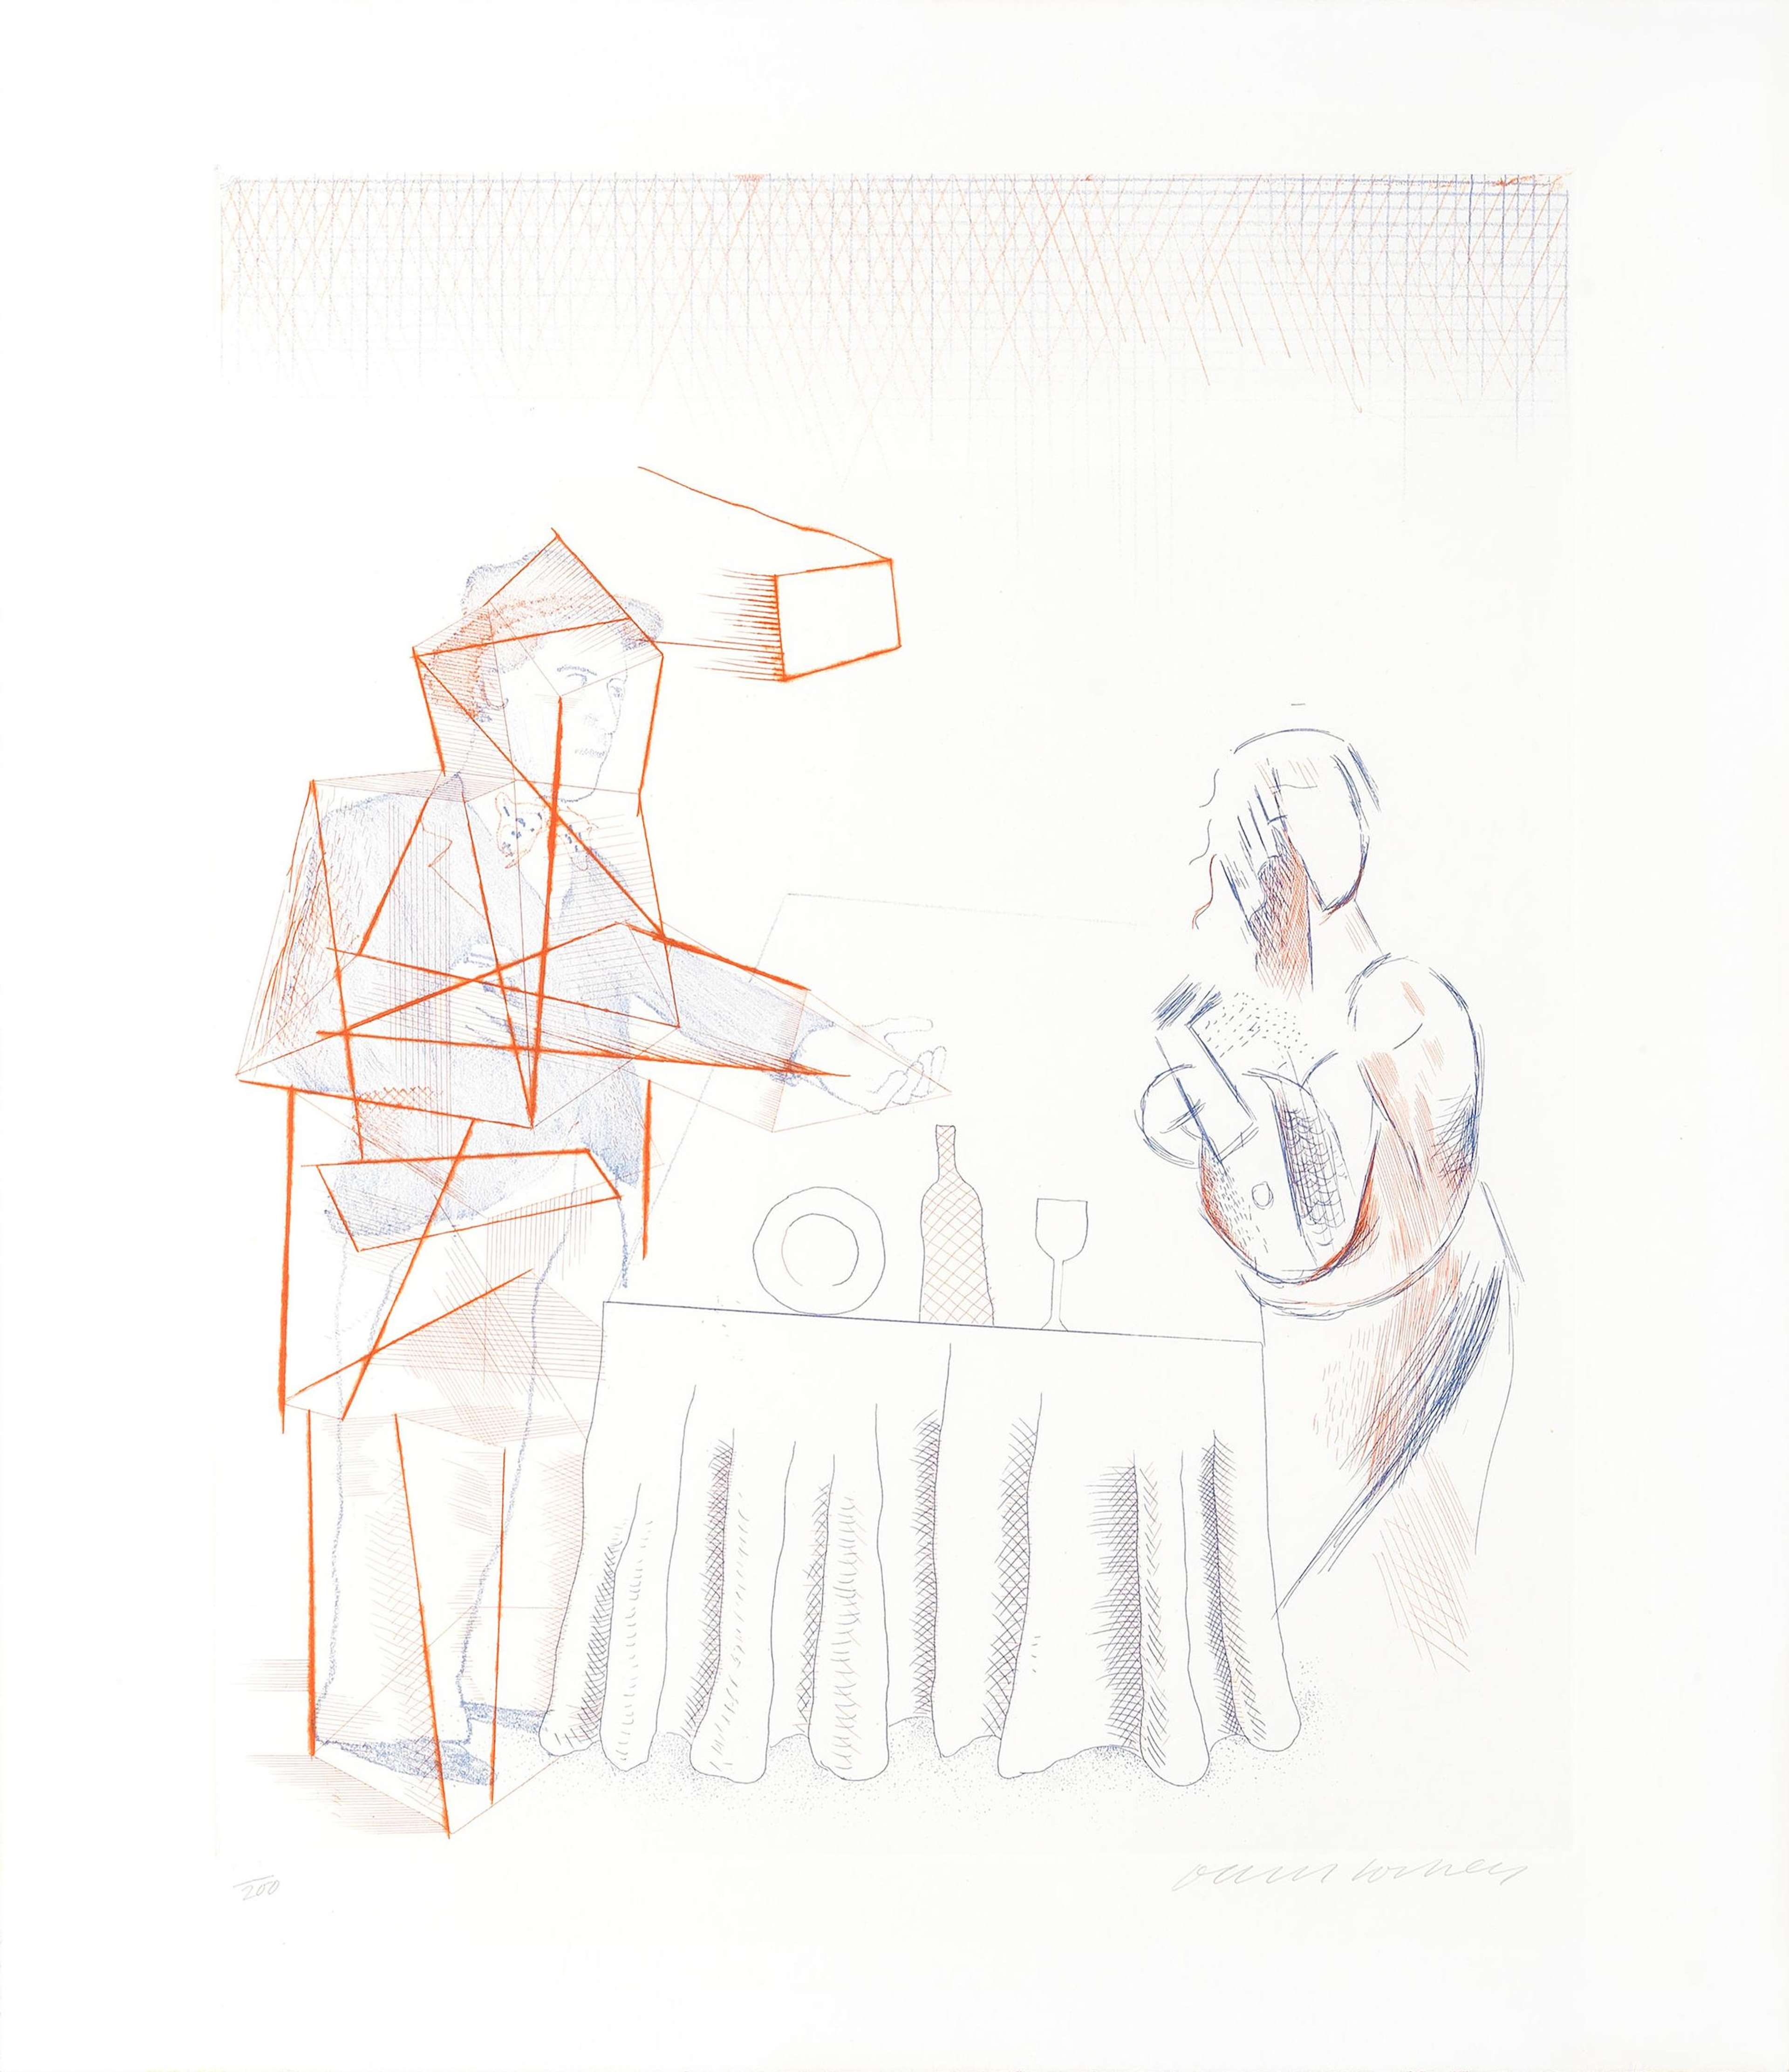 David Hockney’s Figures With Still Life. An etching of two Cubist subjects standing across from one another at a table with a plate, wine glass, and bottle. 